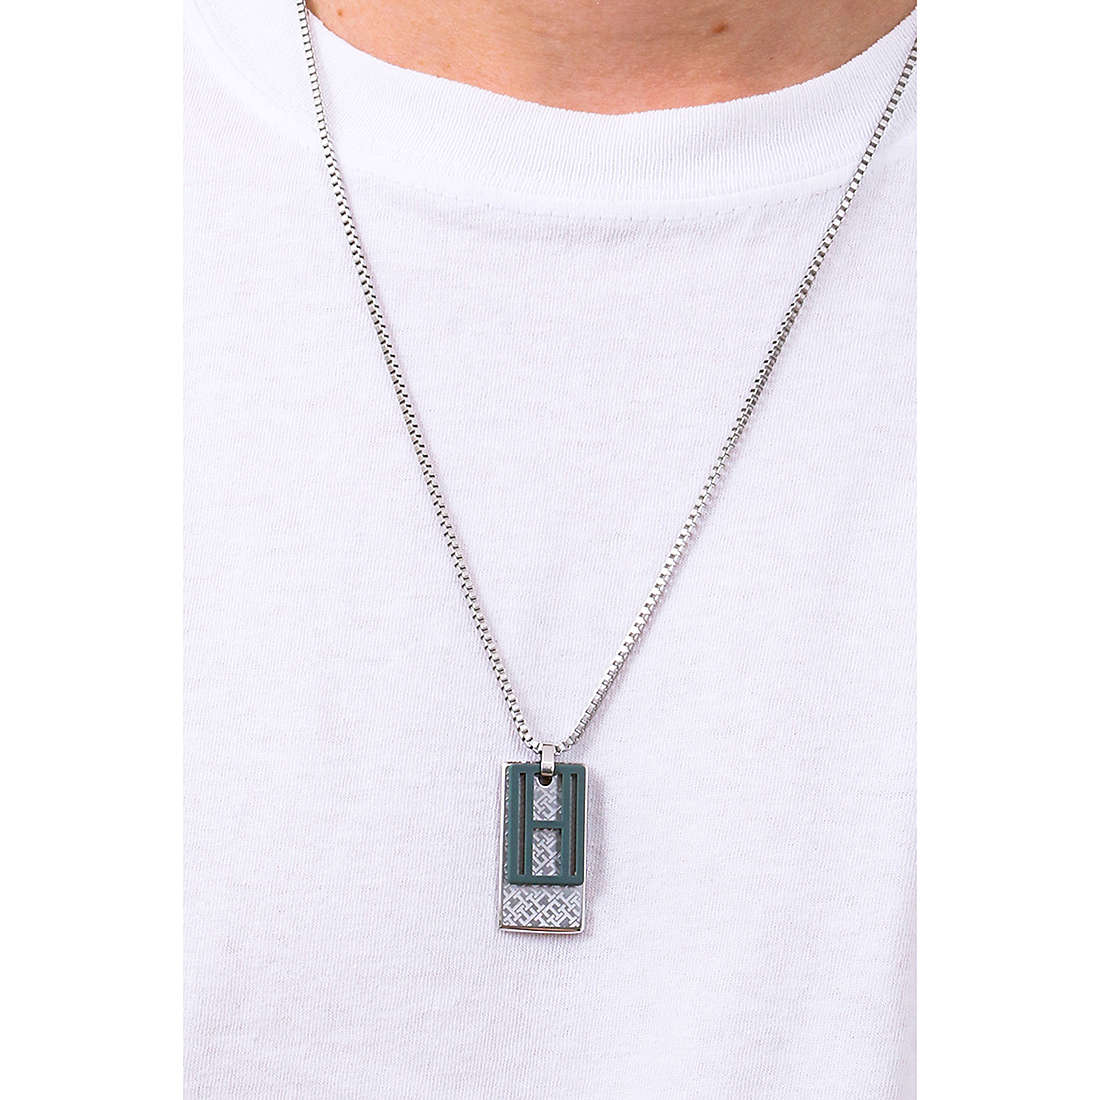 Tommy Hilfiger necklaces Anthony Ramos Capsule man 2790450 wearing